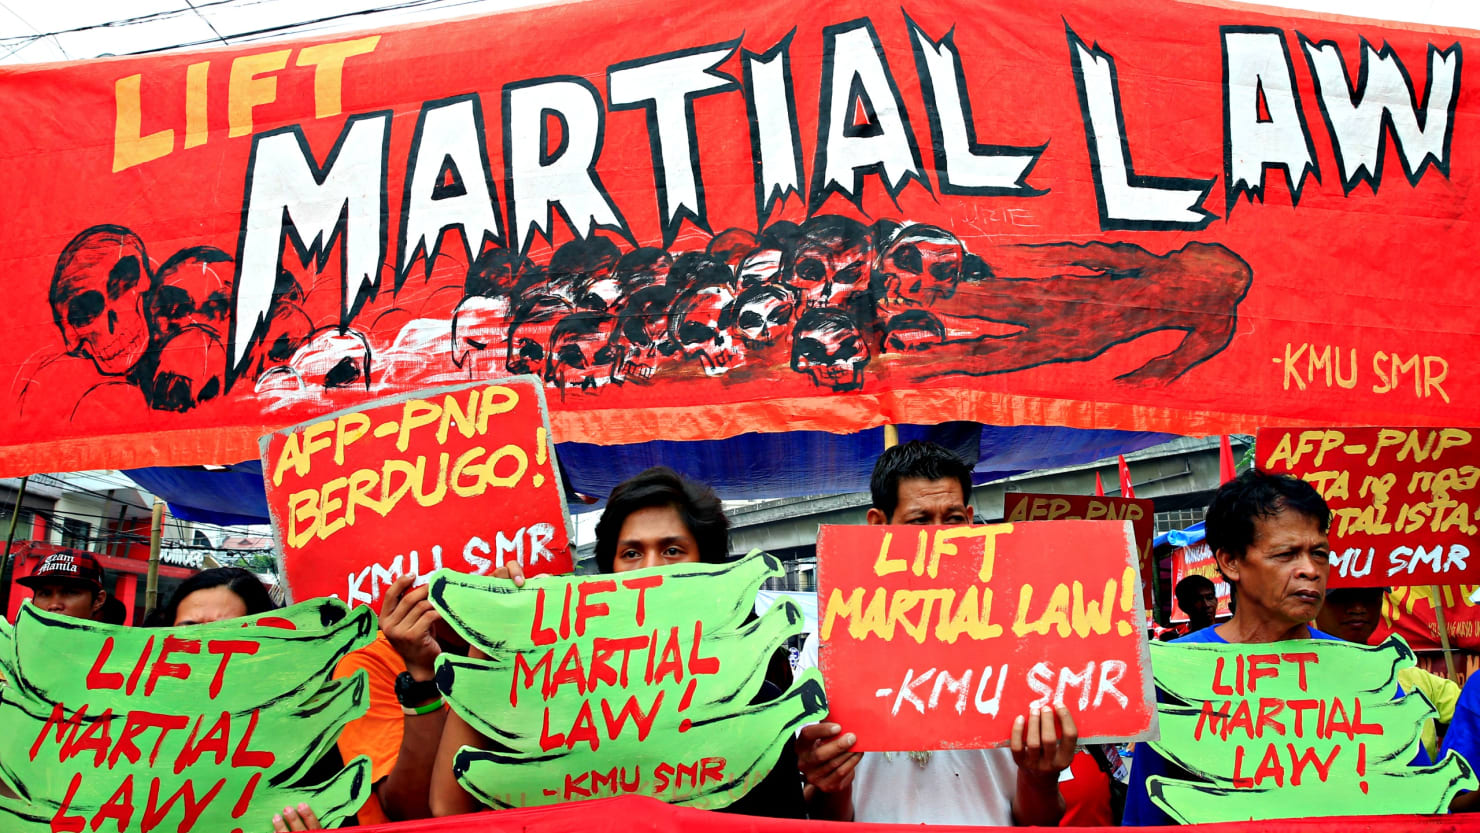 Duterte Seeks to Extend Martial Law Through End of 20171480 x 833